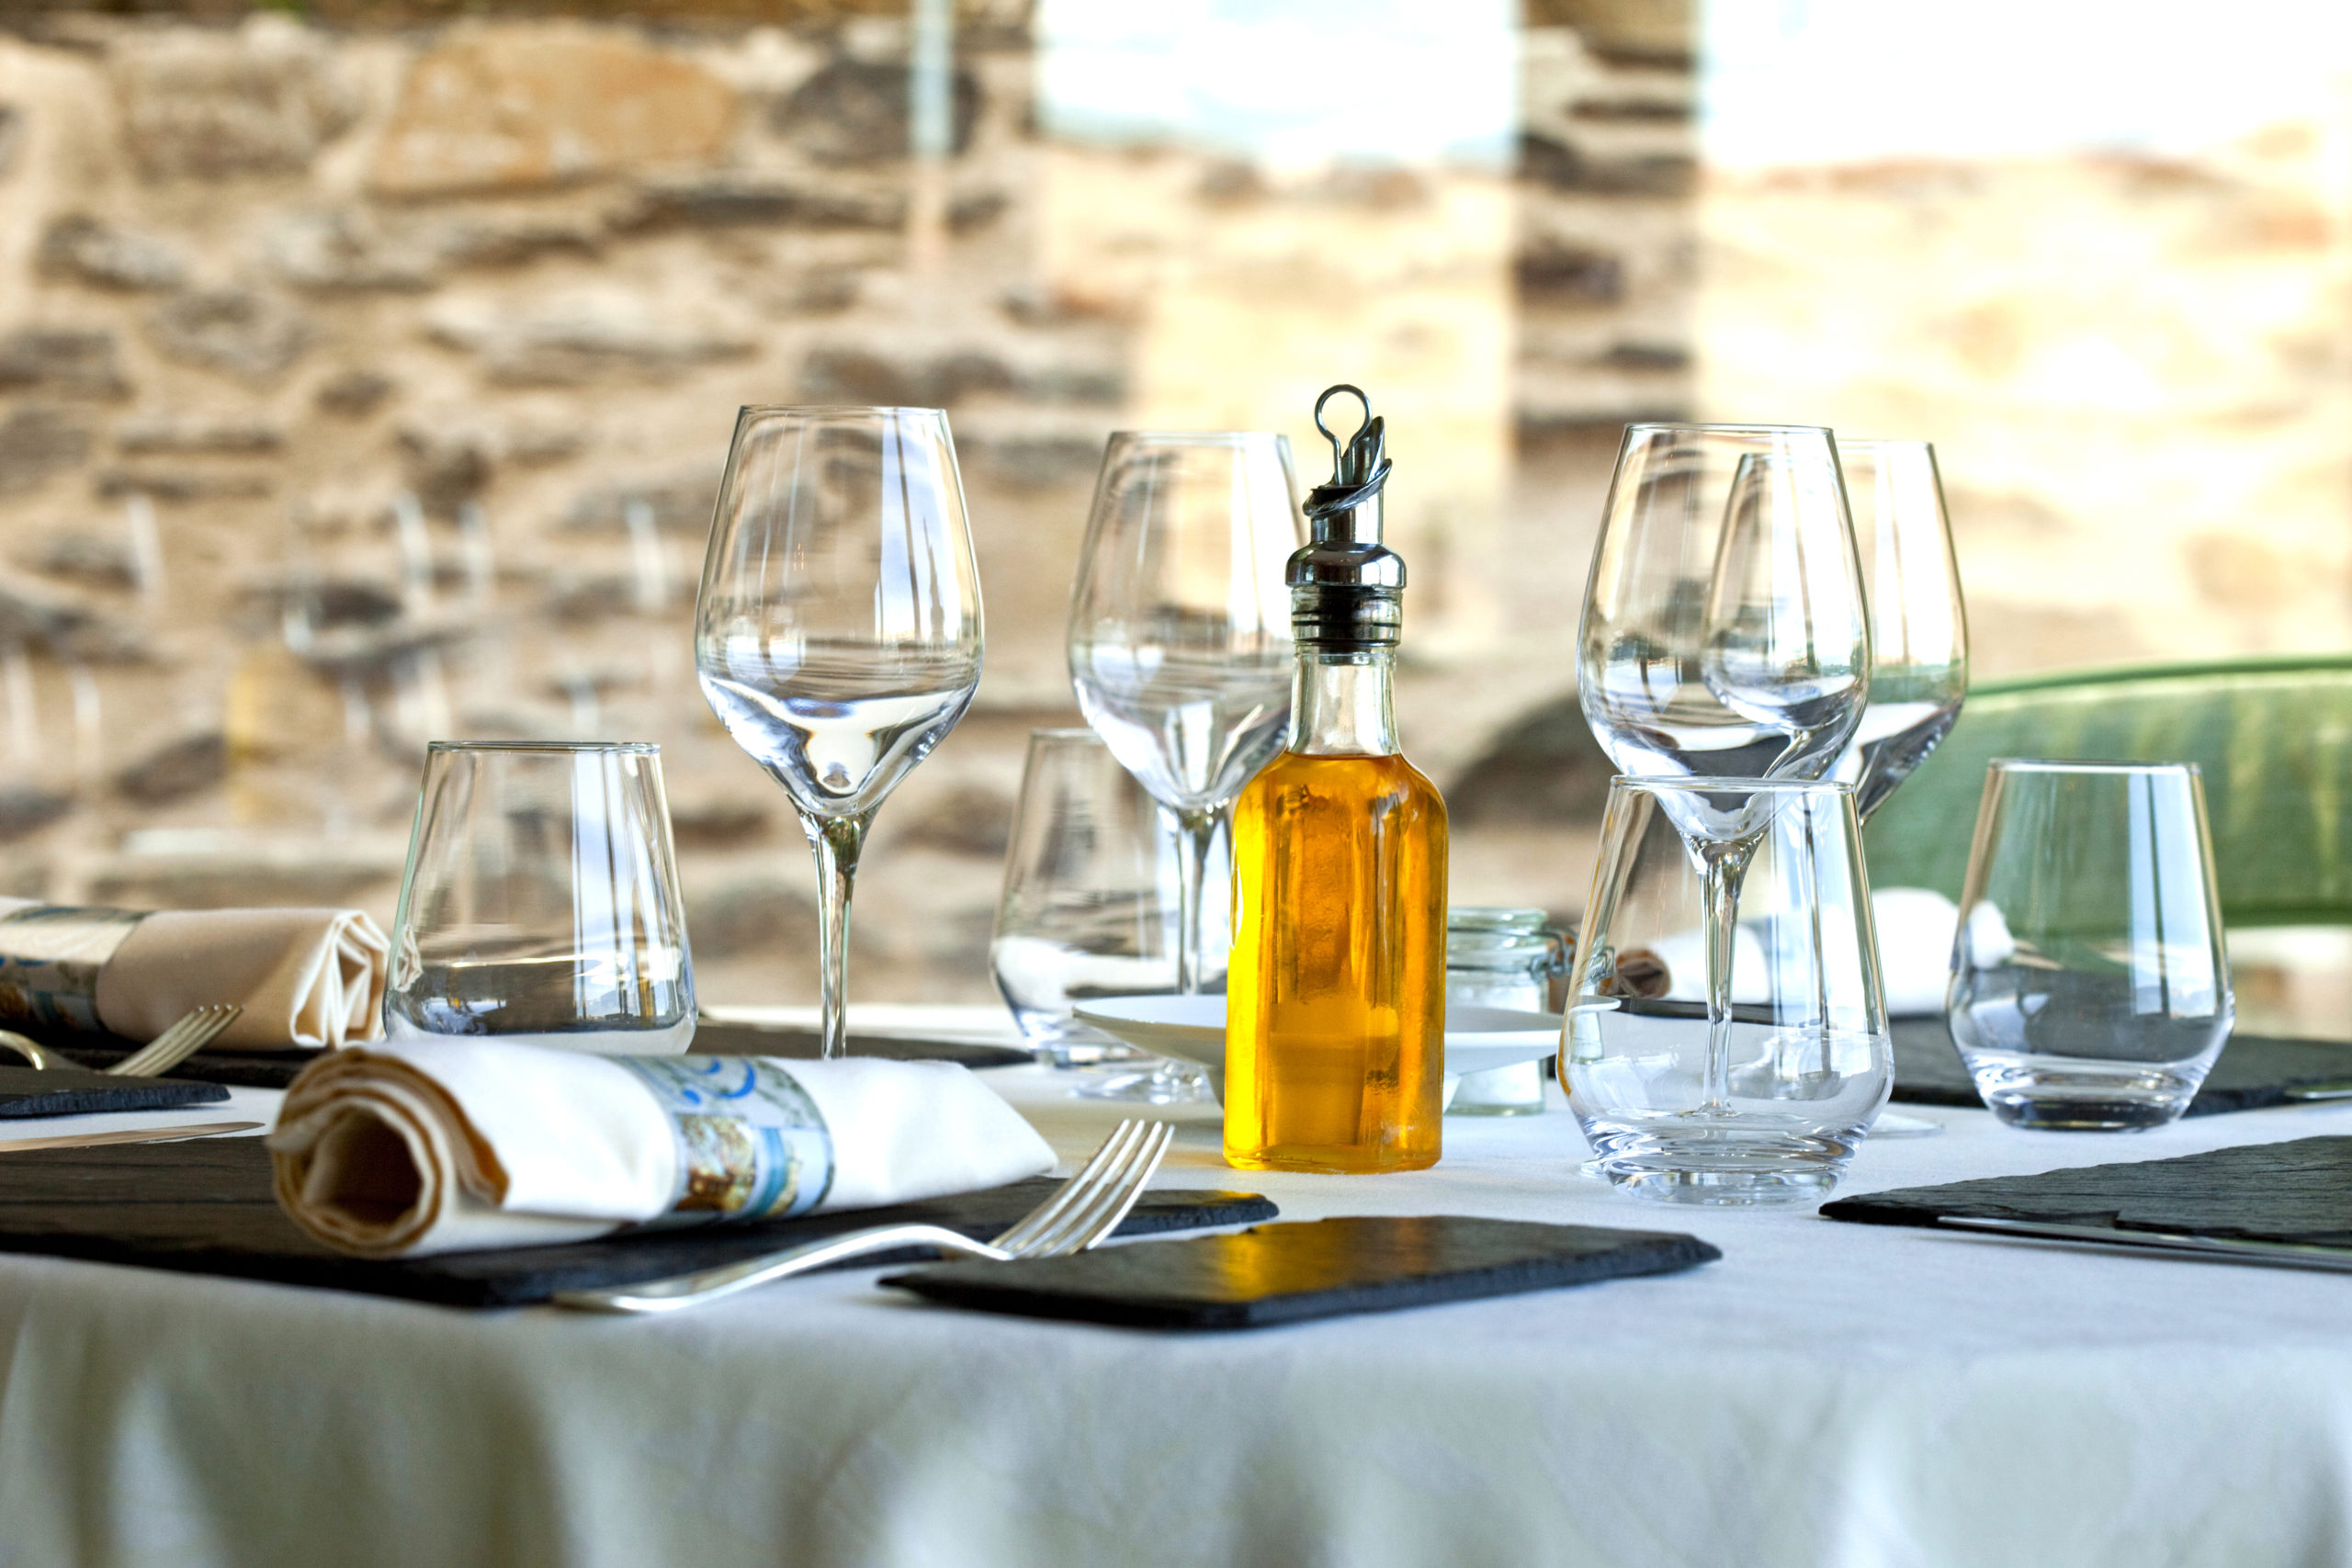 How To Stay On Top of Upkeep in Your Restaurant